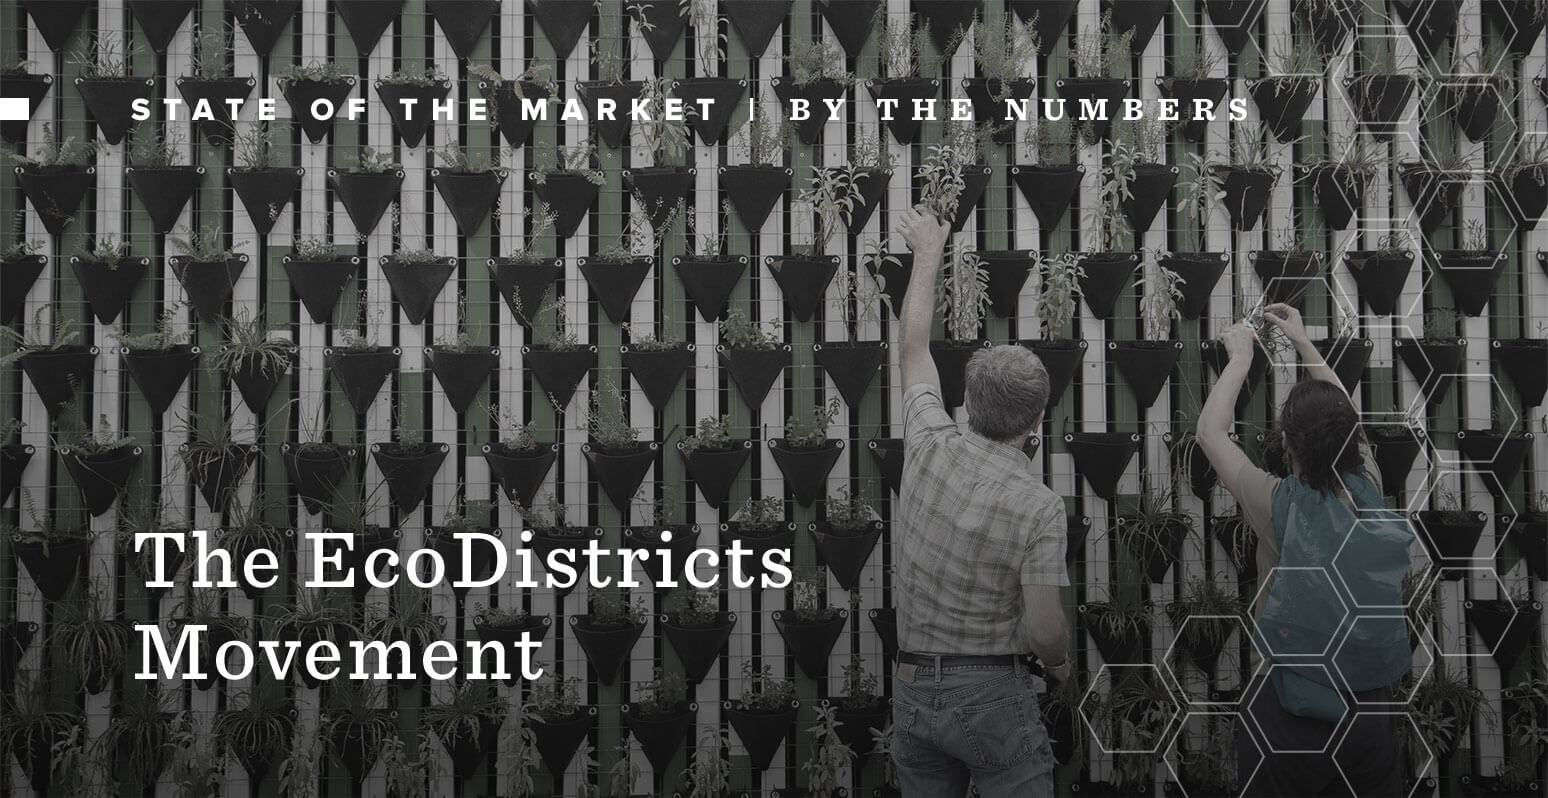 State of the Market: By The Numbers - The EcoDistricts Movement